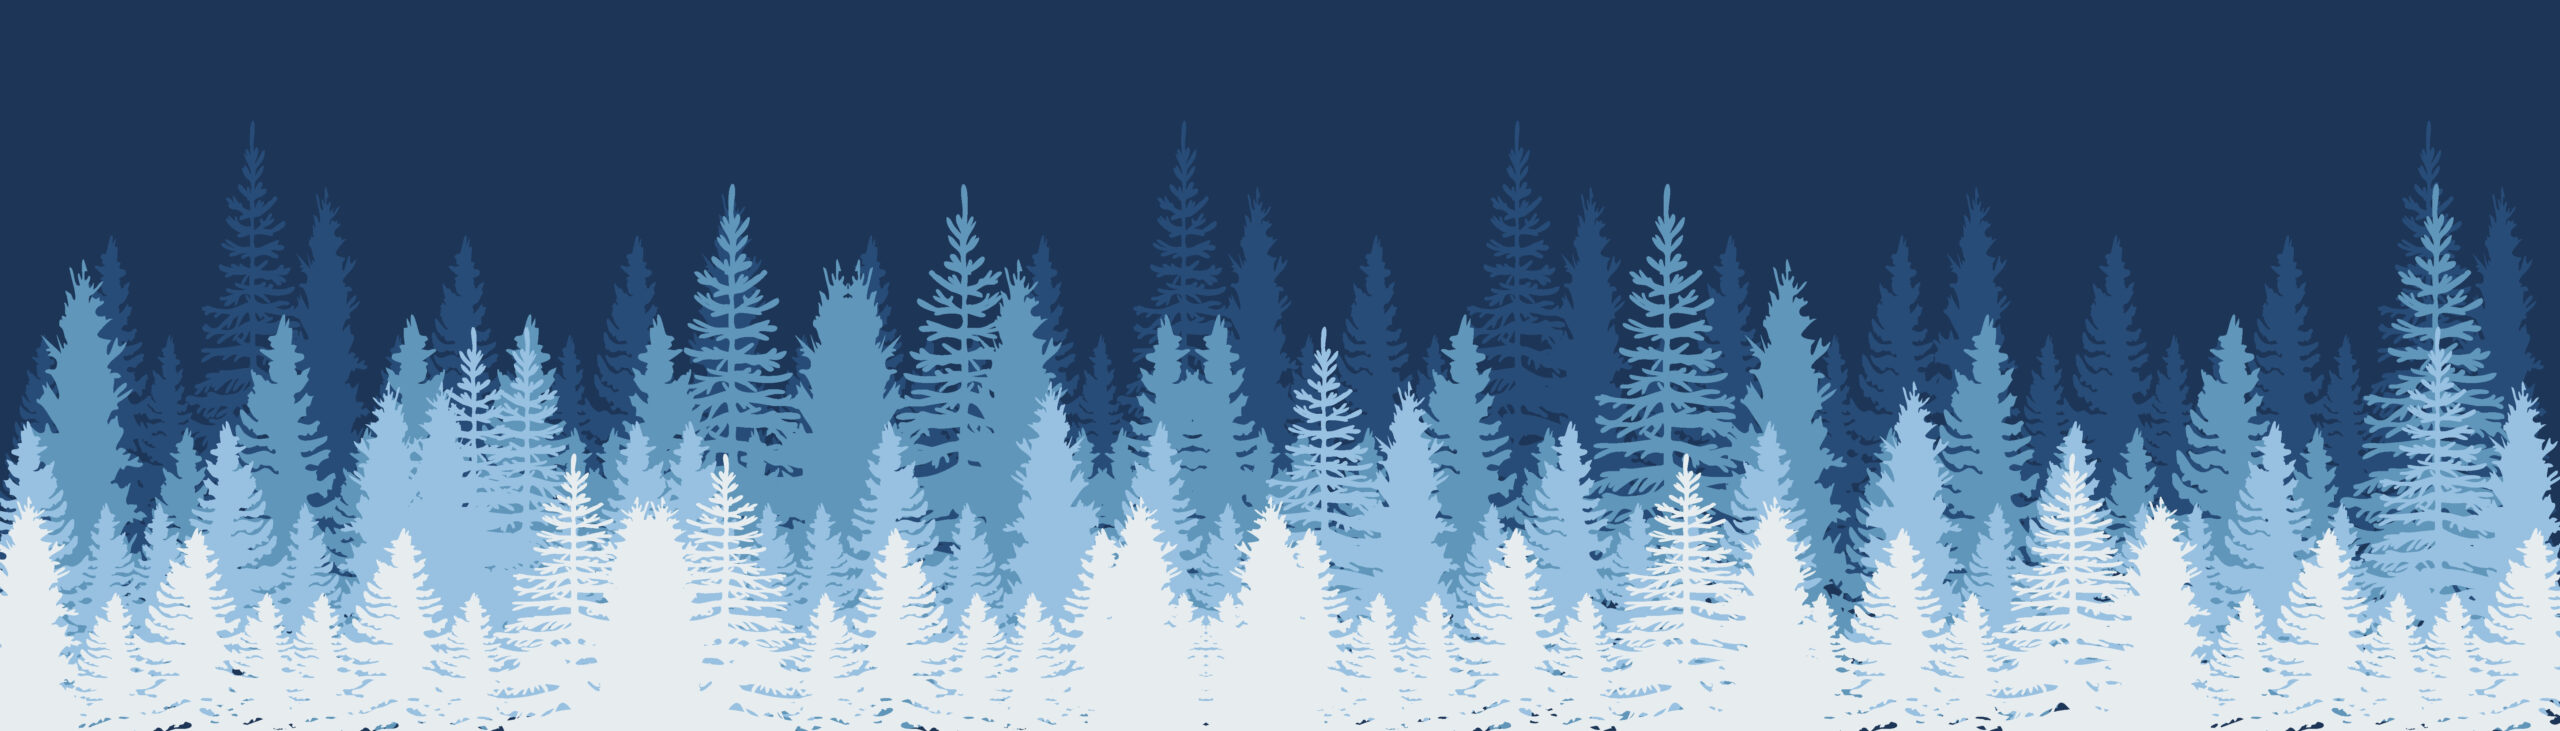 White and Blue Trees on a Dark Blue Background